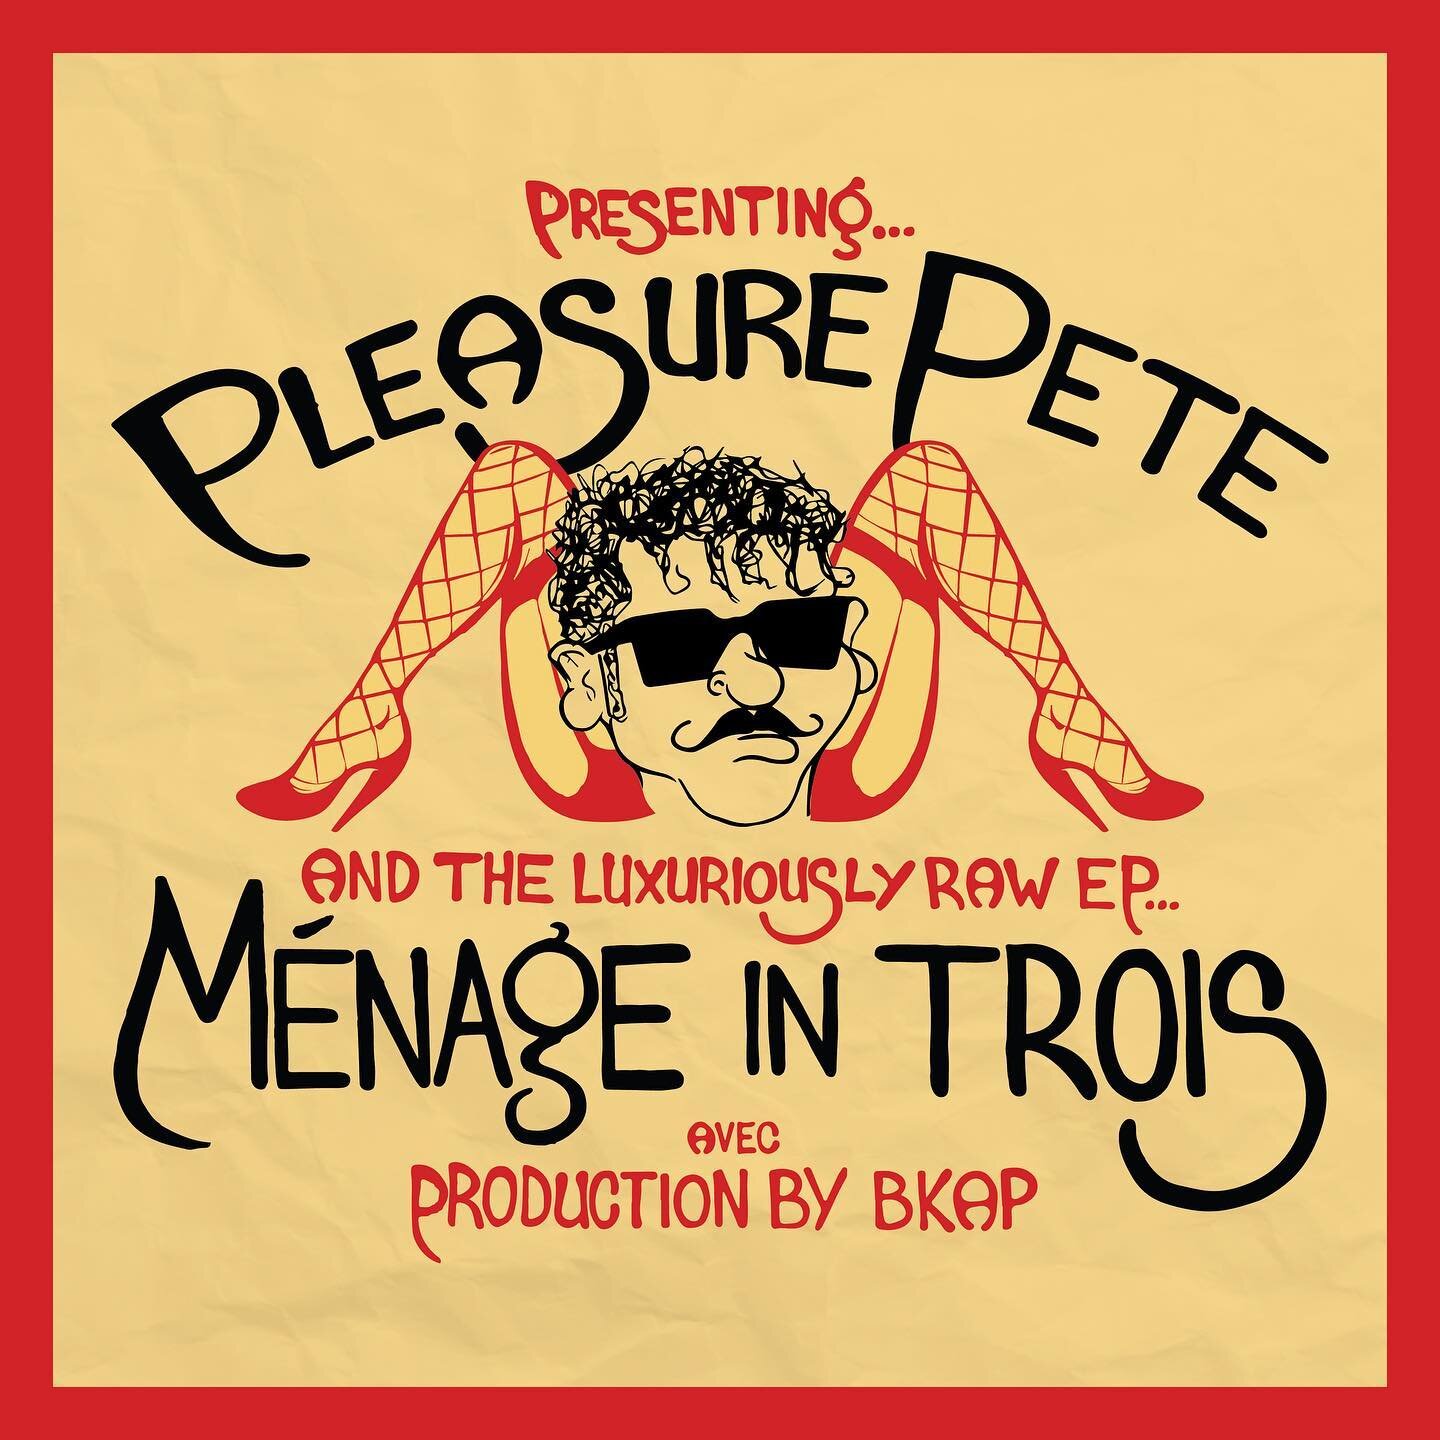 OUT NOW!!!
@pleasurepete M&eacute;nage in Trois. 
3 tracks produced by myself(@bkap_noize )
Featuring cuts by @dj7l
Lettering &amp; Character Art by @dirtweiser 
Mixed by @jonglass_ 
Recorded @thenewglasshousestudio 
#hiphop #newenglandhiphop #repnew